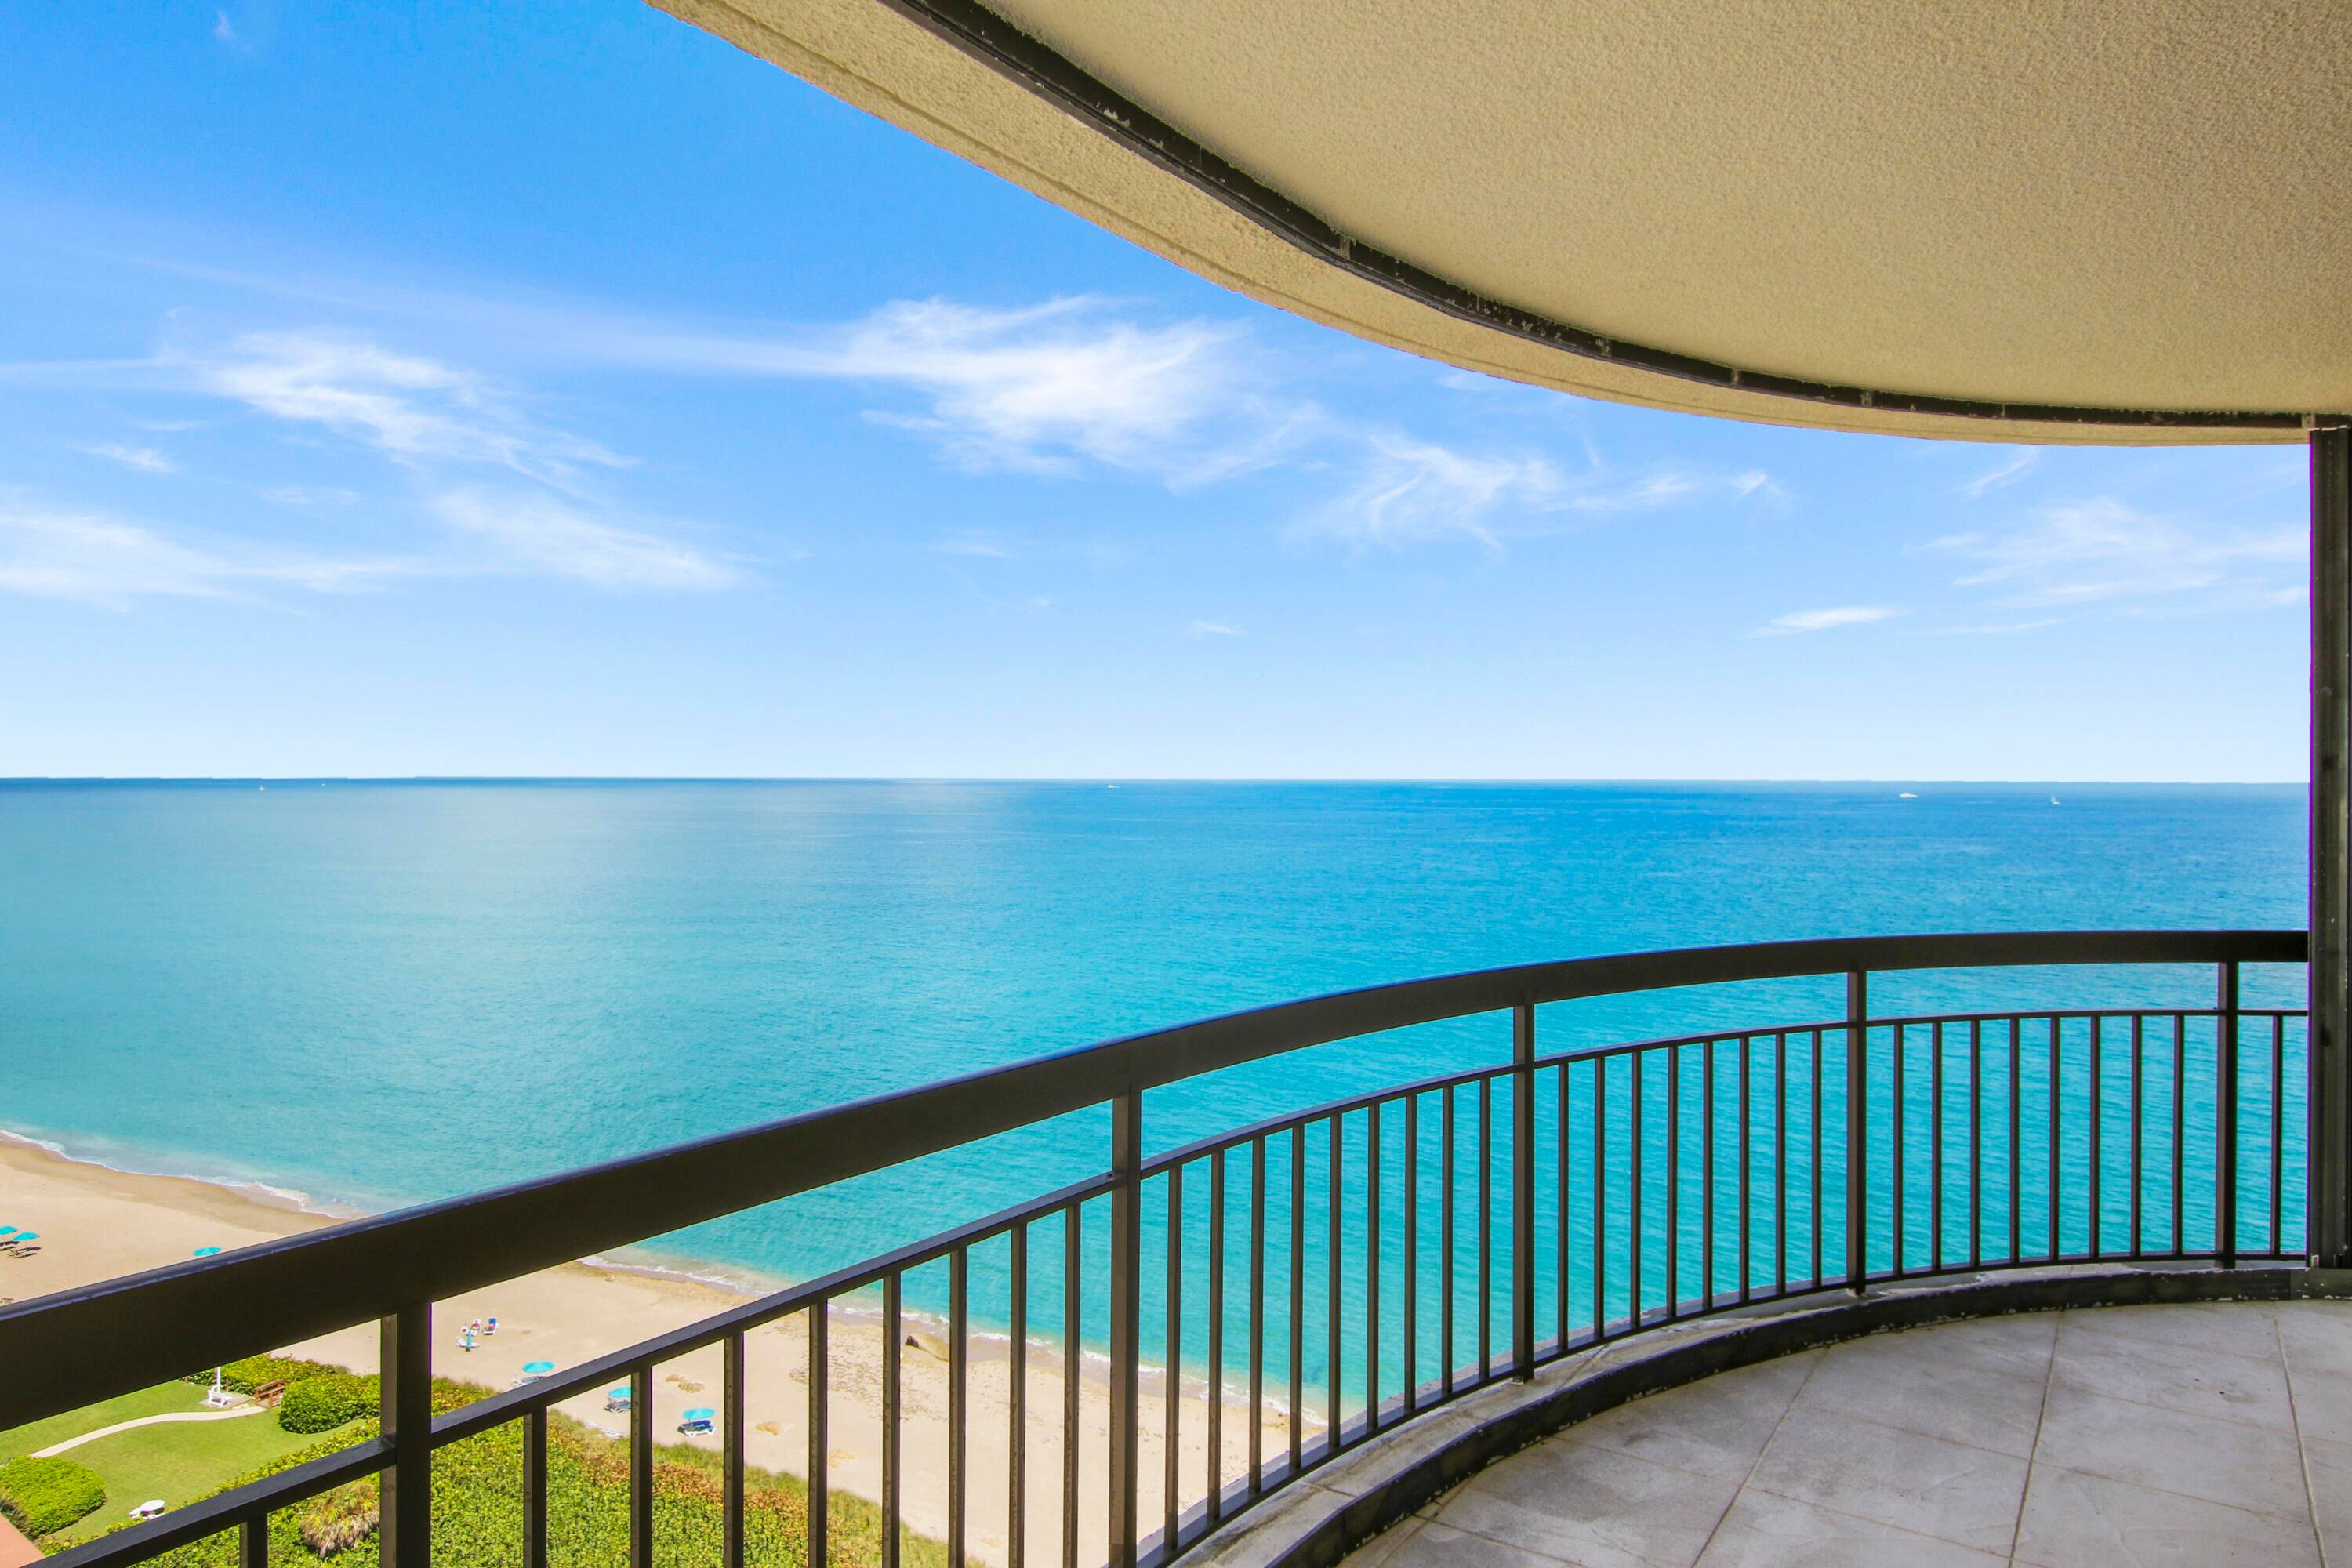 Direct Ocean Views Totally Renovated Floor to Ceiling Windows Water Views from EVERY ROOM 2 Garage Parking Spaces.